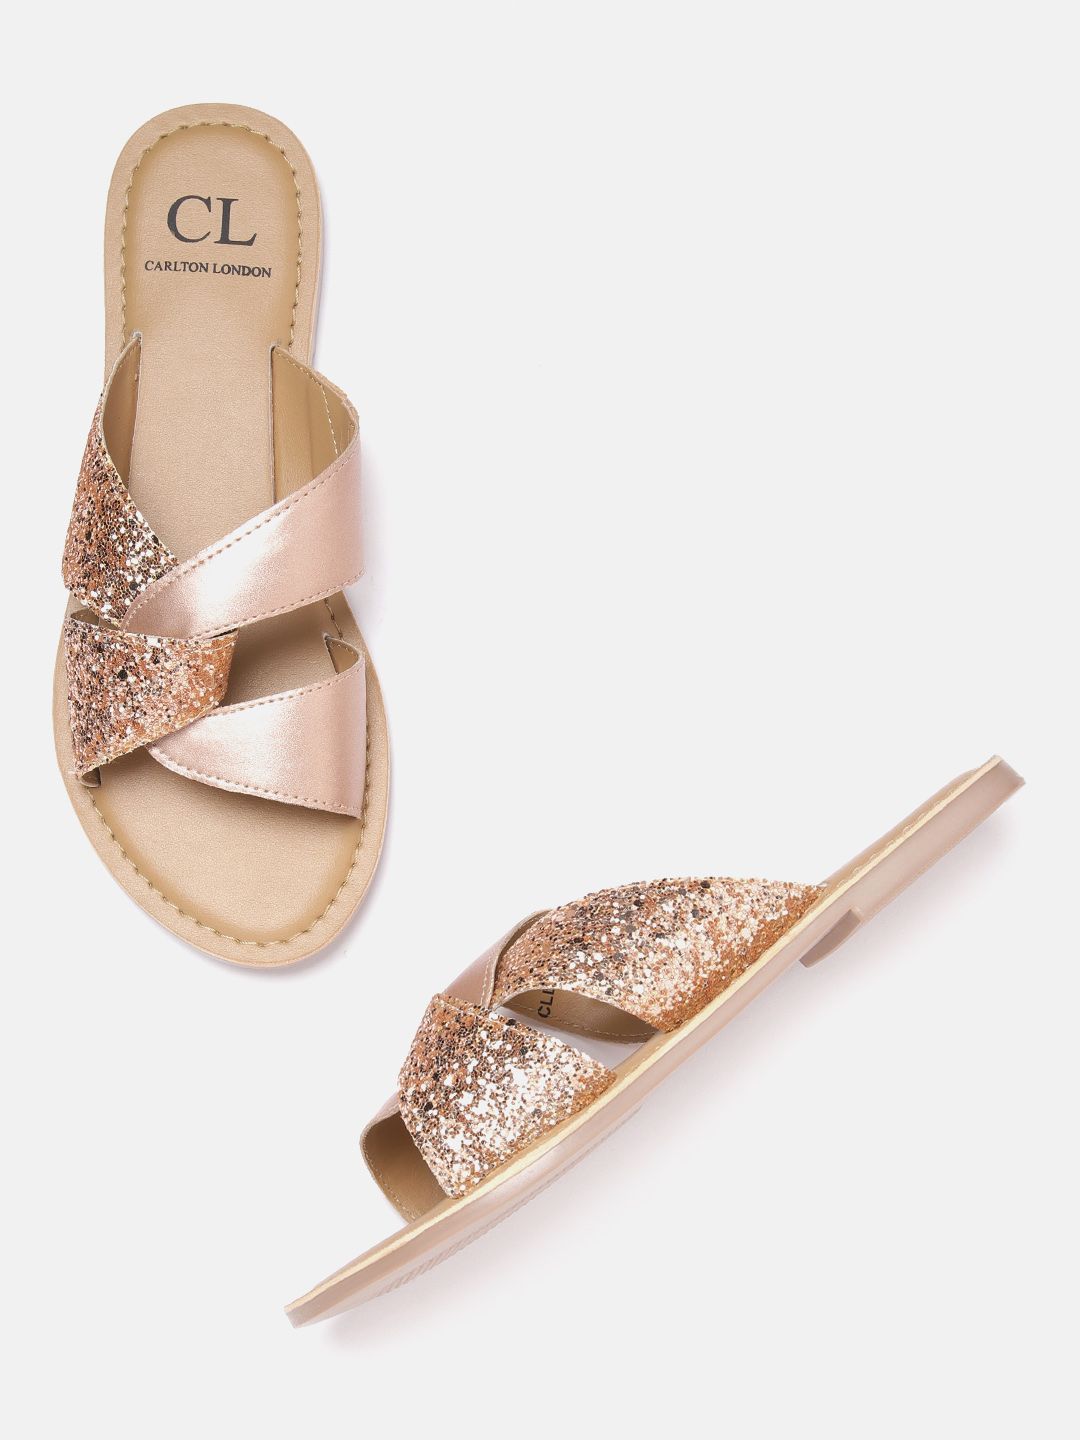 Carlton London Women Rose Gold-Toned Embellished Open Toe Flats Price in India